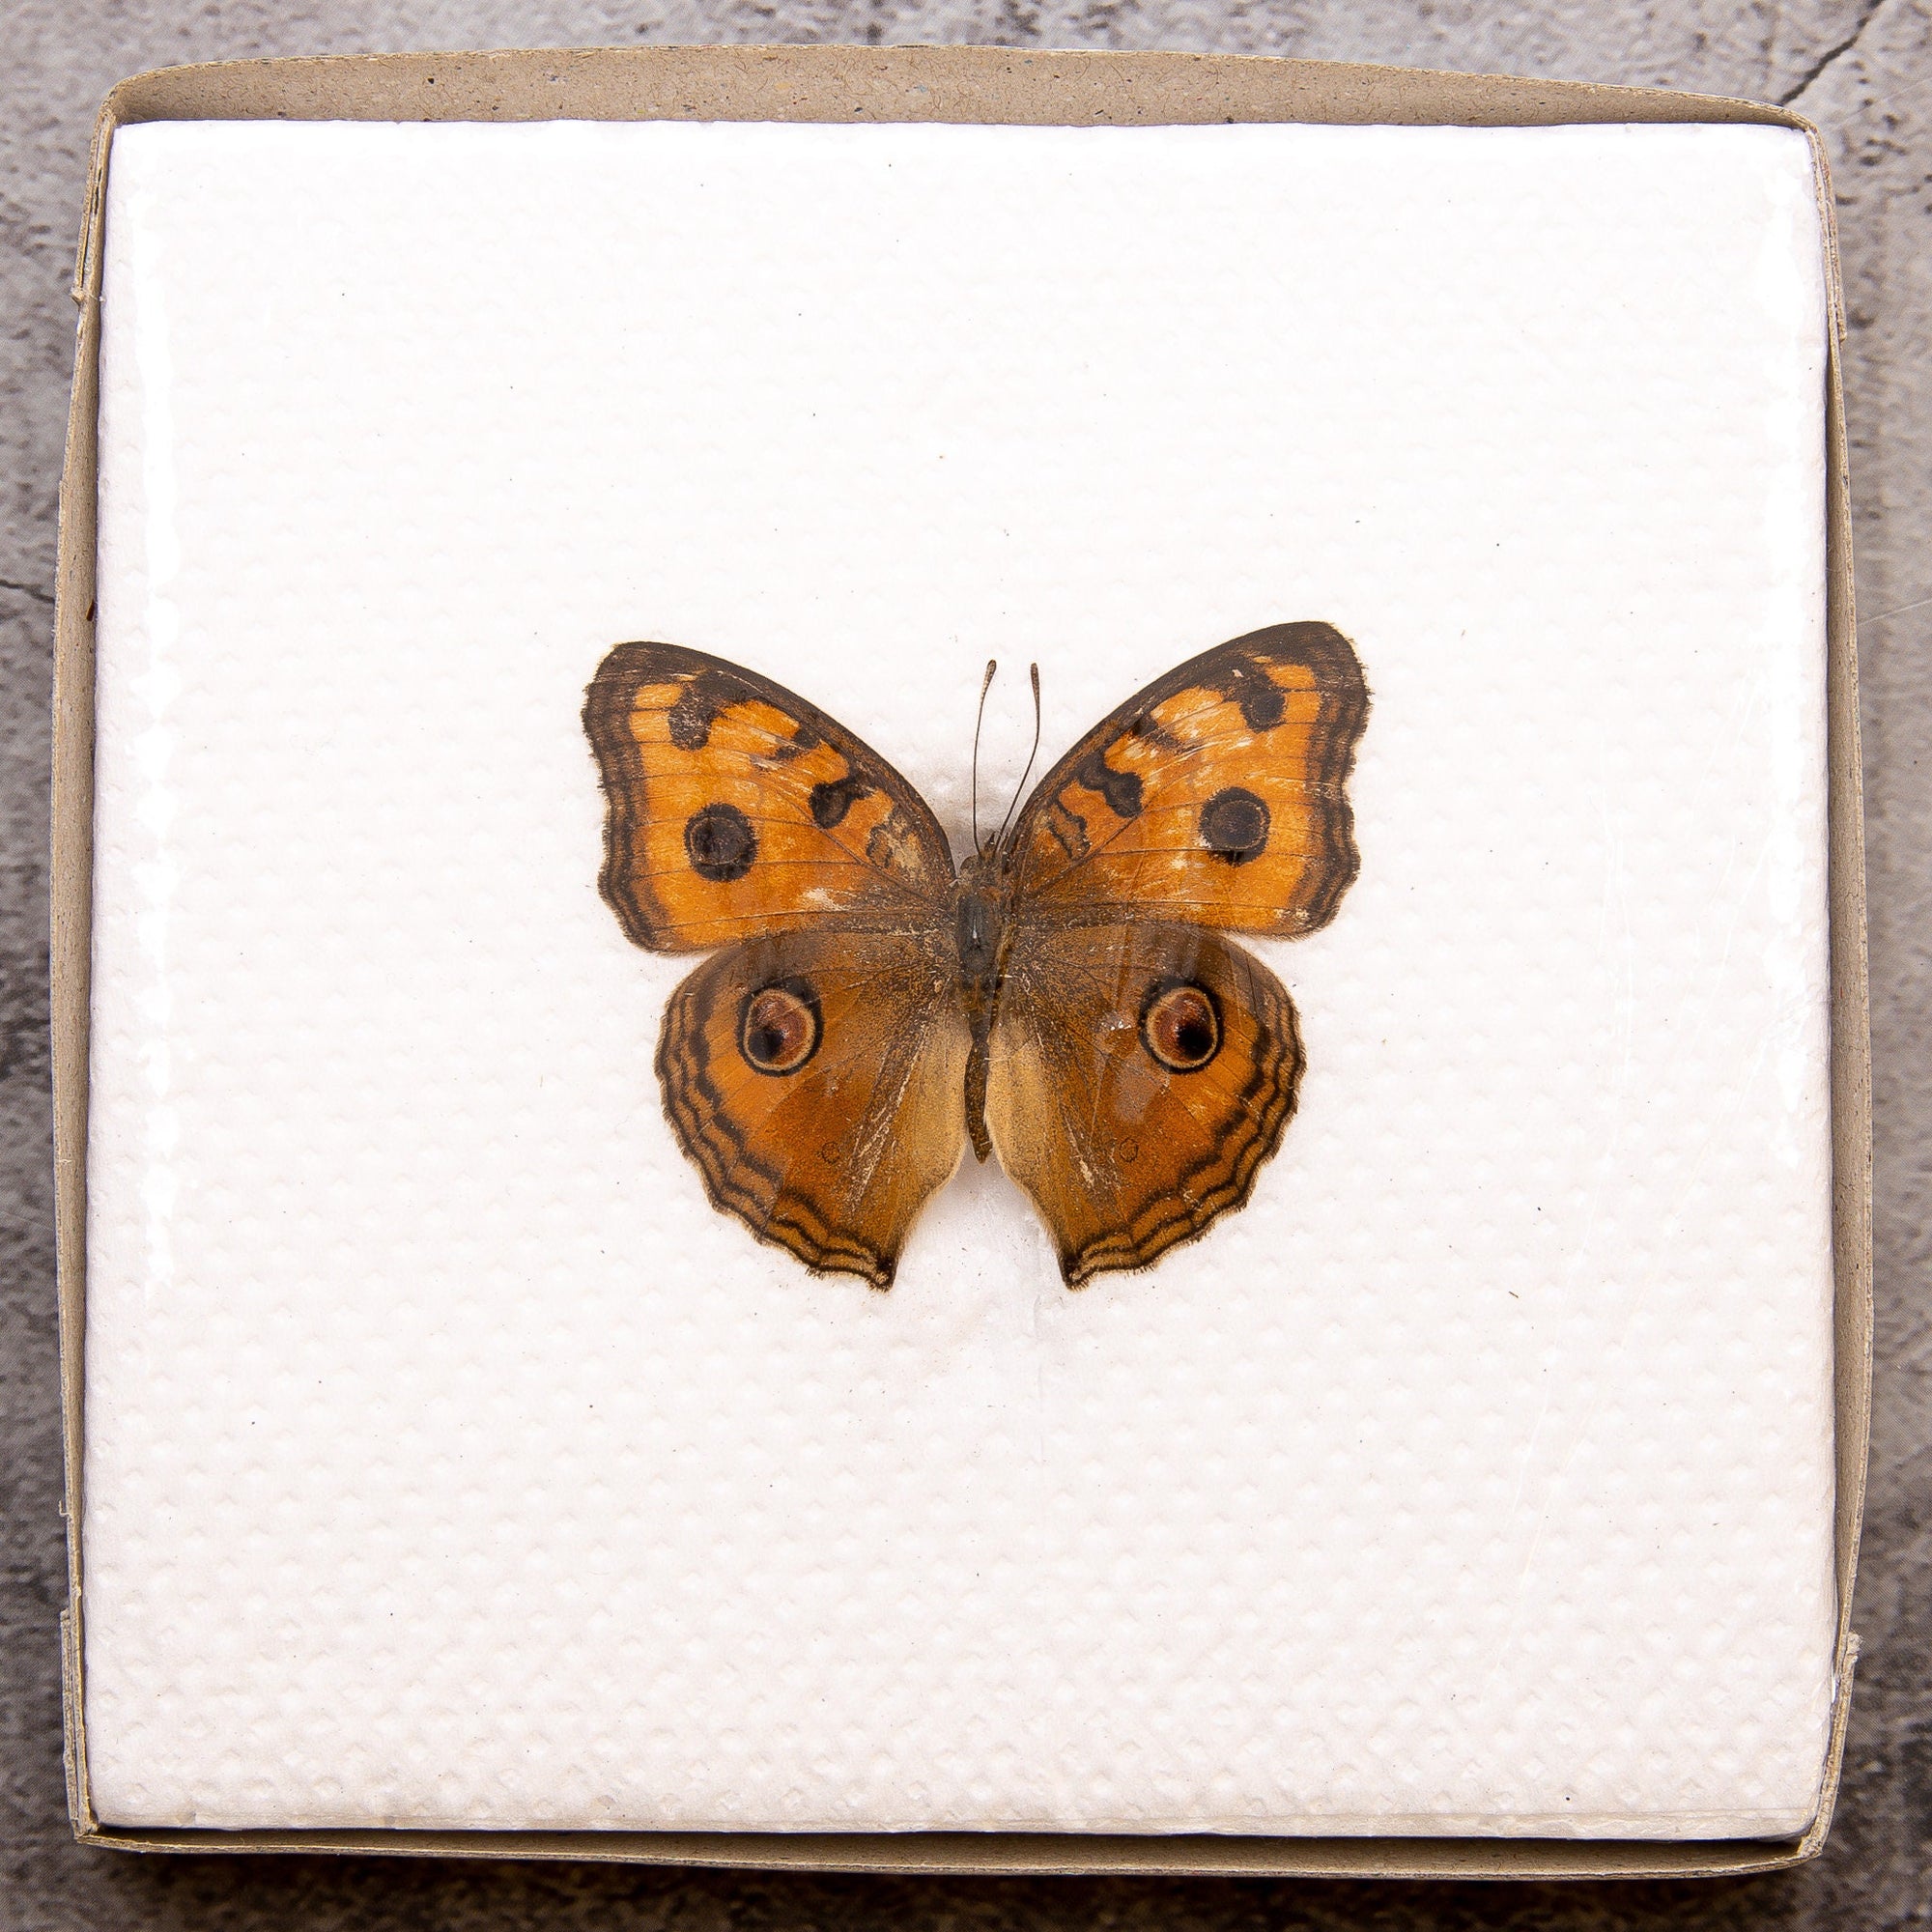 Pack of 2 Peacock Pansy Butterflies (Junonia almana) WINGS-SPREAD, Ethically Sourced Preserved Specimens for Collecting & Artistic